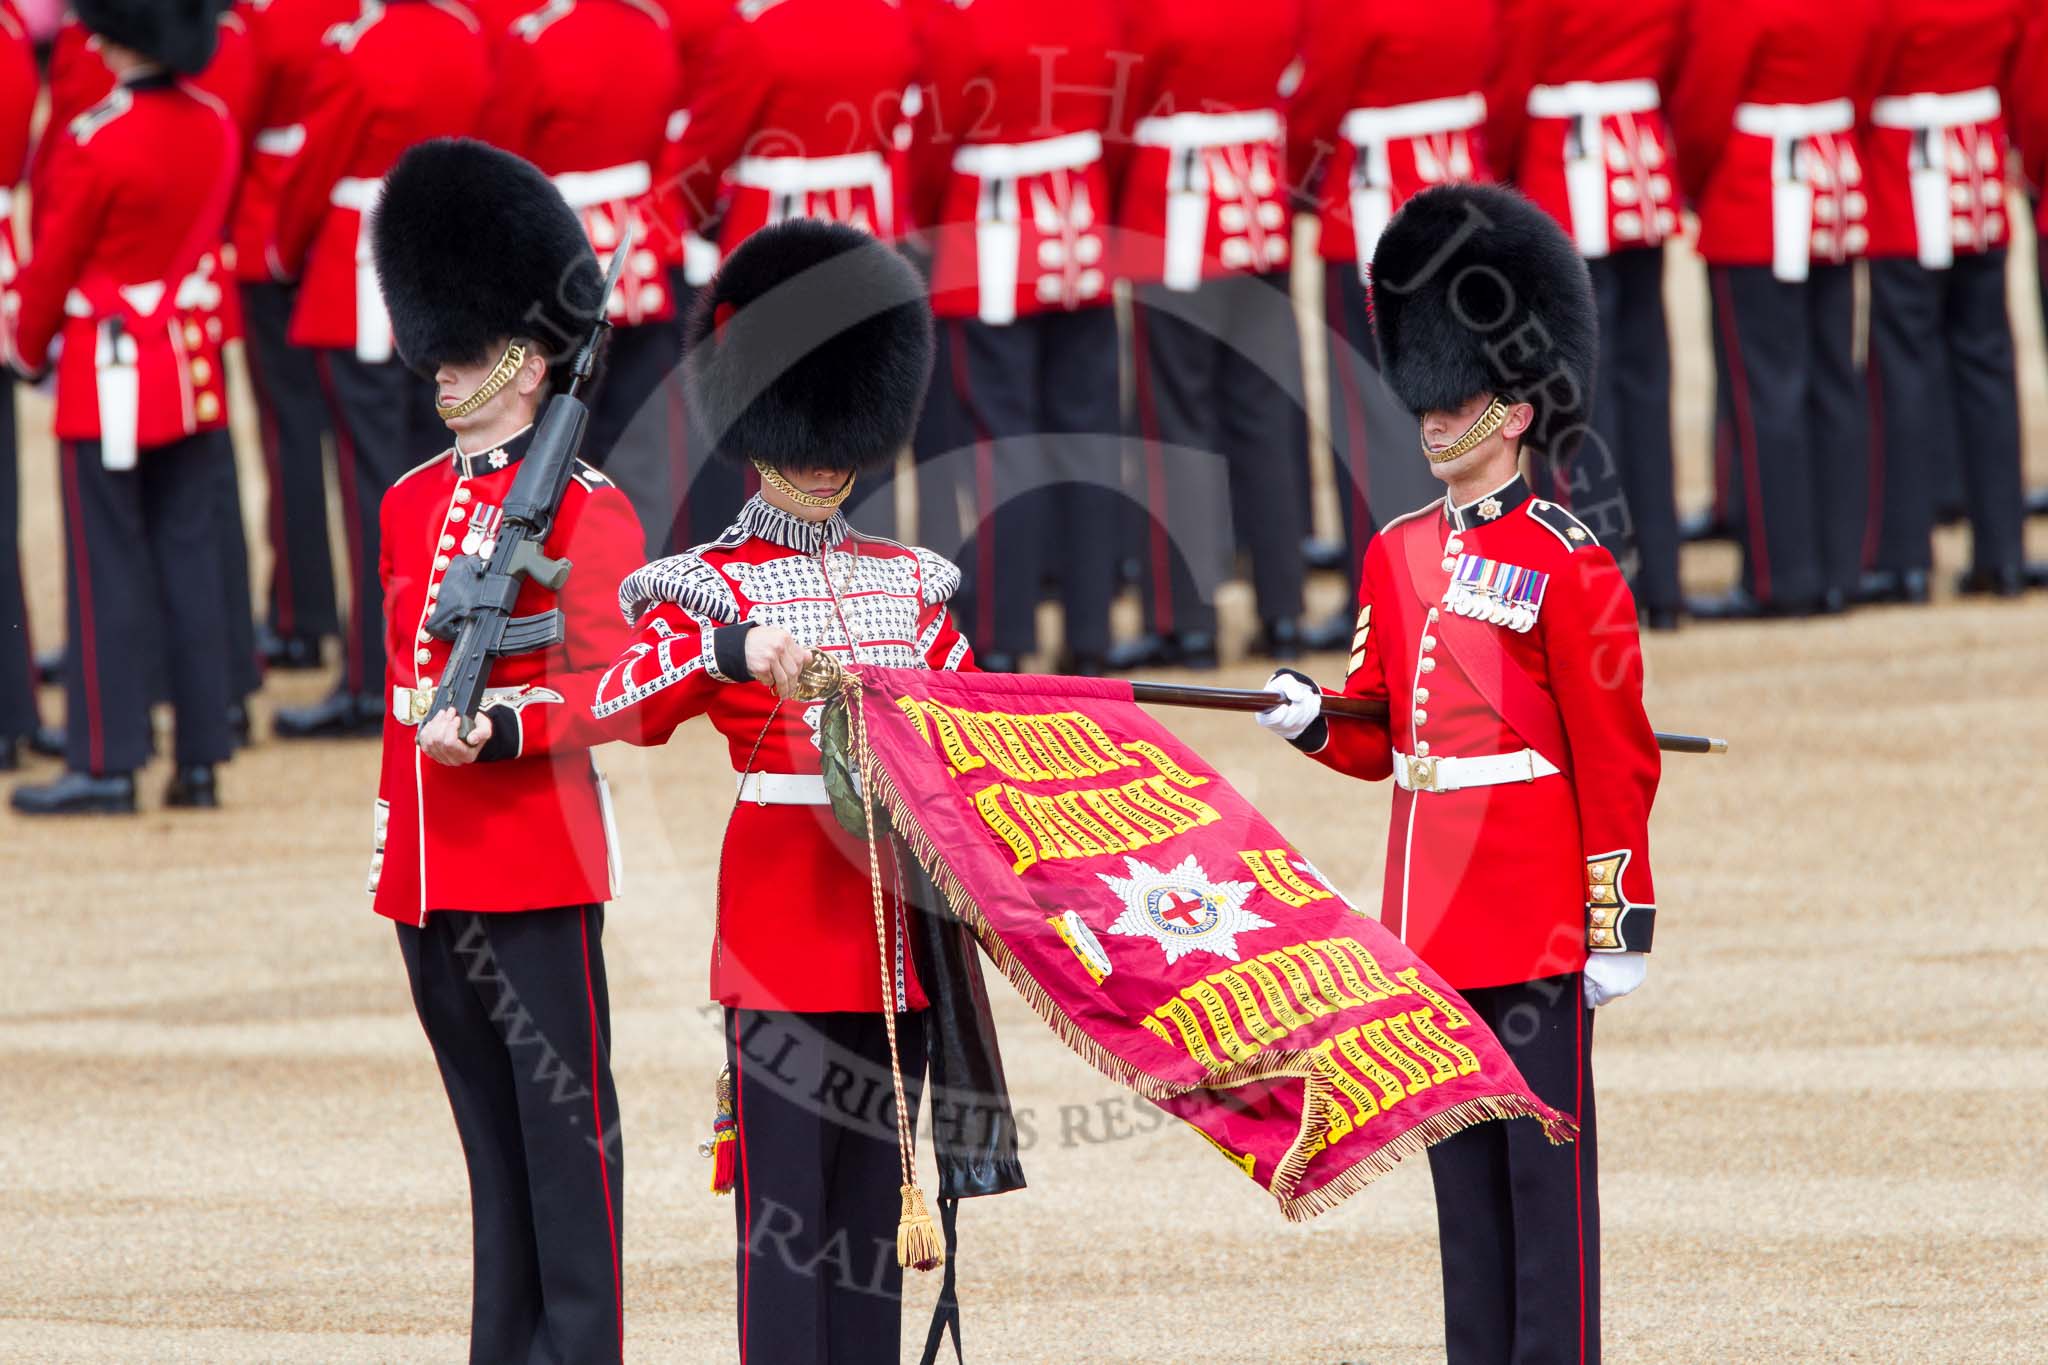 Trooping the Colour 2012: The uncasing the of Colour. With Colour Sergeant Paul Baines MC holding the flag, the Duty Drummer has removed the colour case..
Horse Guards Parade, Westminster,
London SW1,

United Kingdom,
on 16 June 2012 at 10:32, image #79